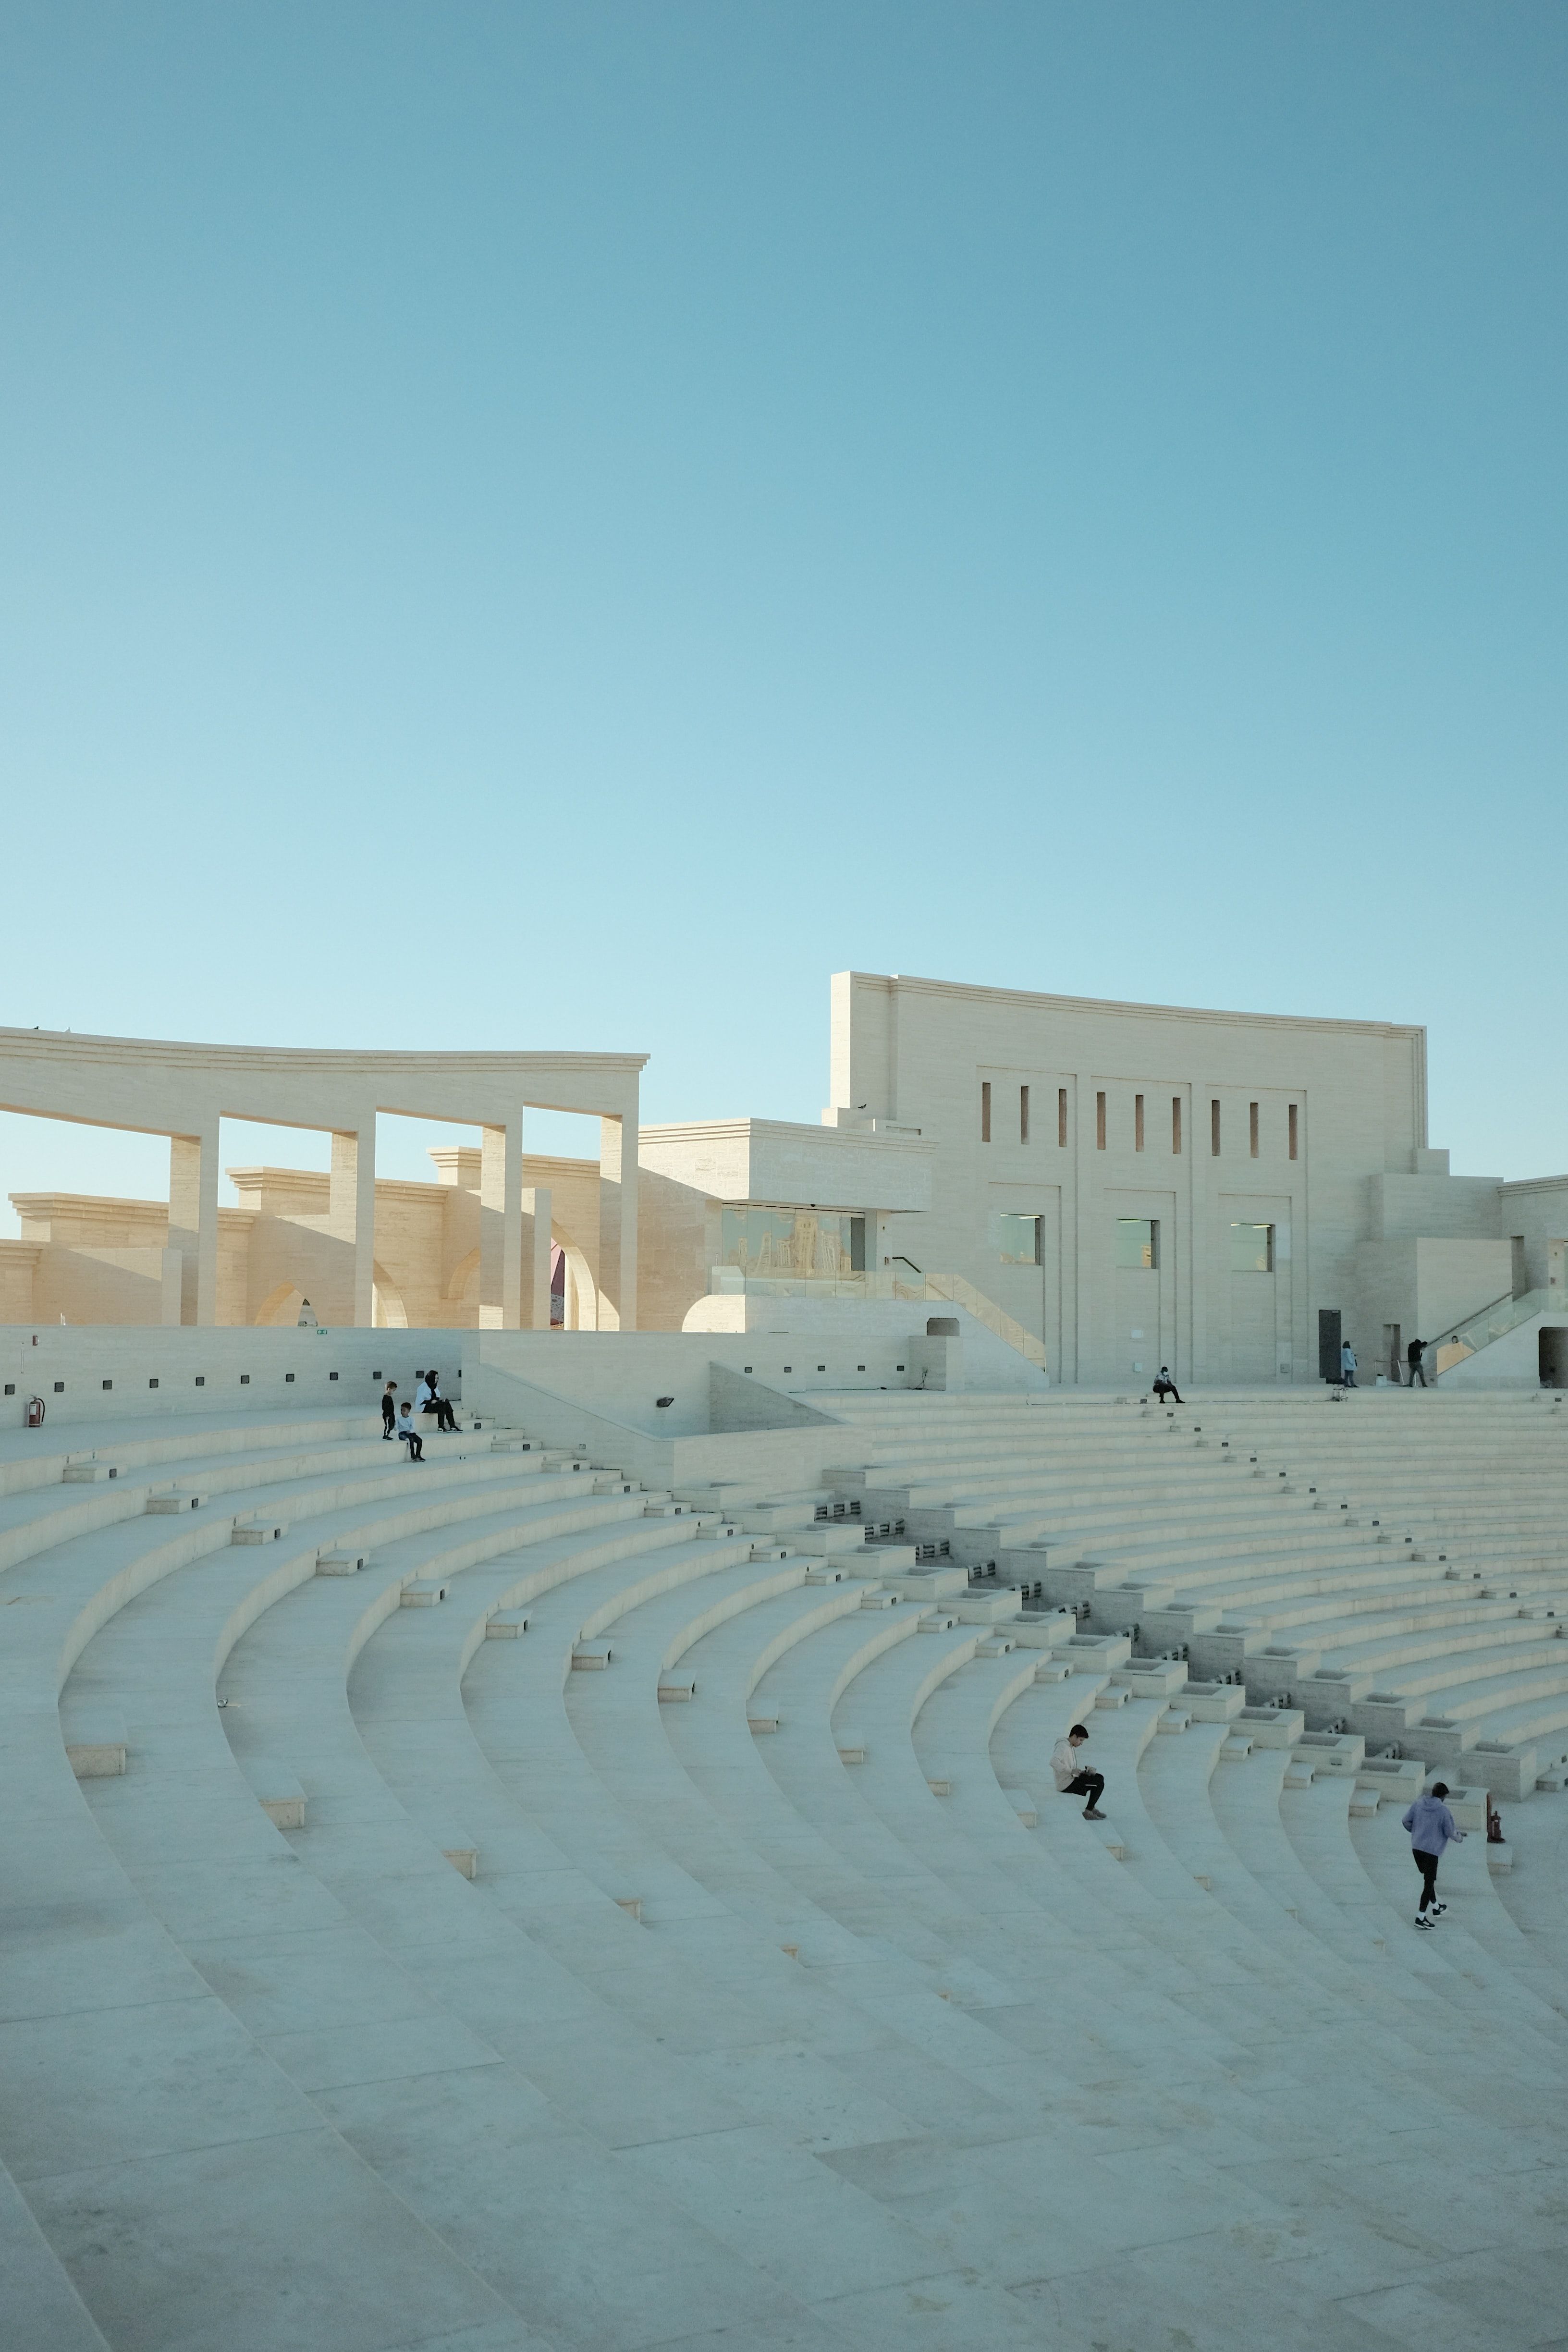 A white stone outdoor amphitheatre at Katara Village with tiered seating, under a clear blue sky.